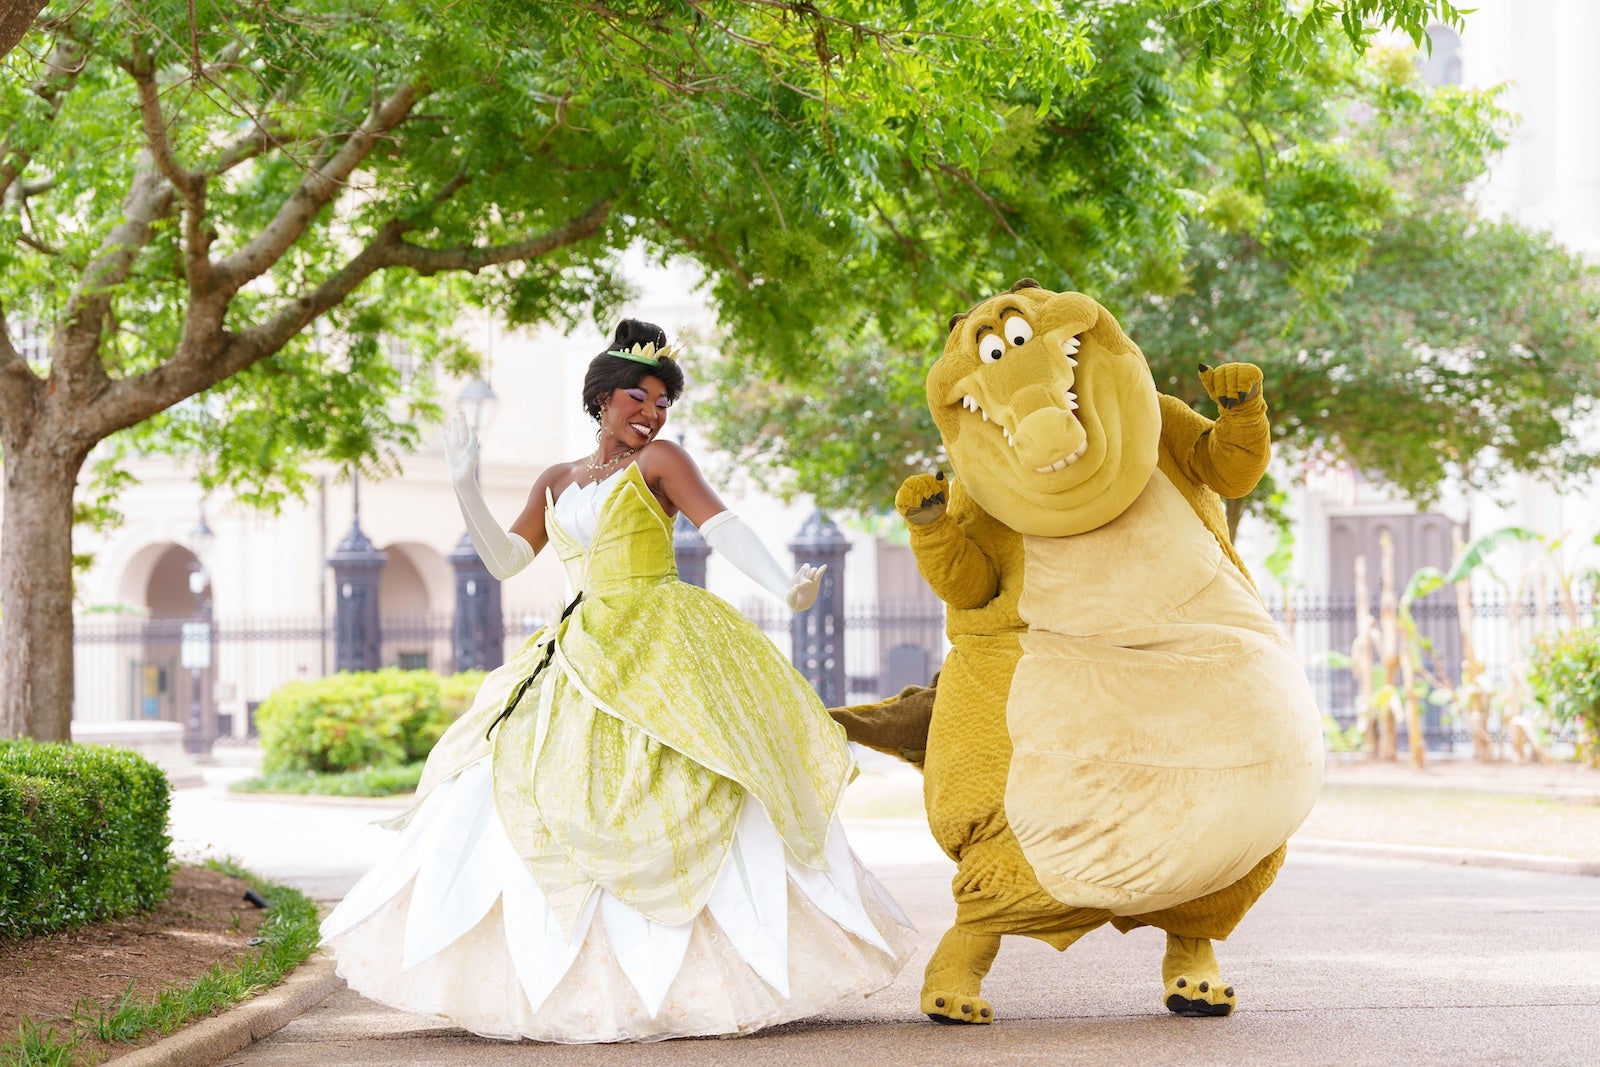 Tiana and Louis